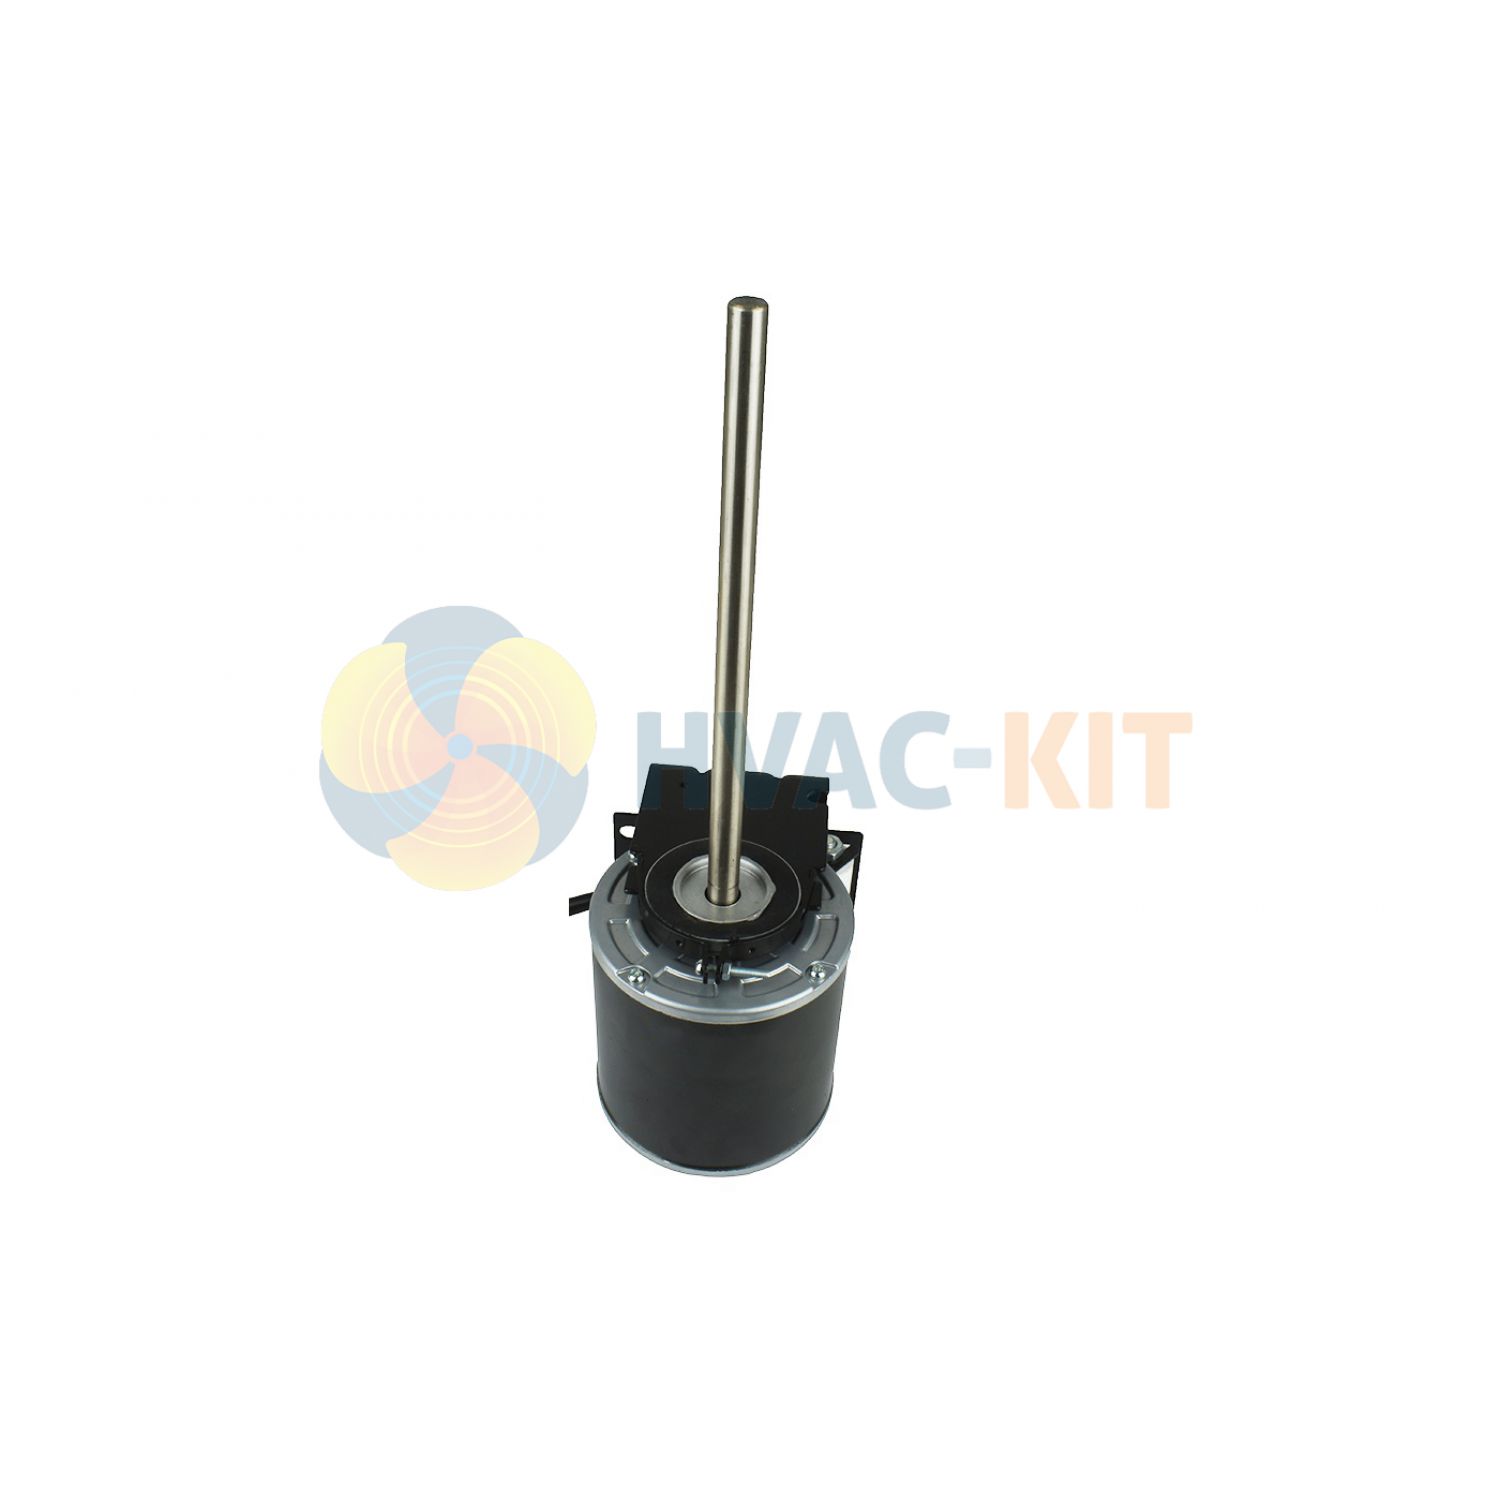 35-4-35/3A1_4 Resilient Base Mount Motor